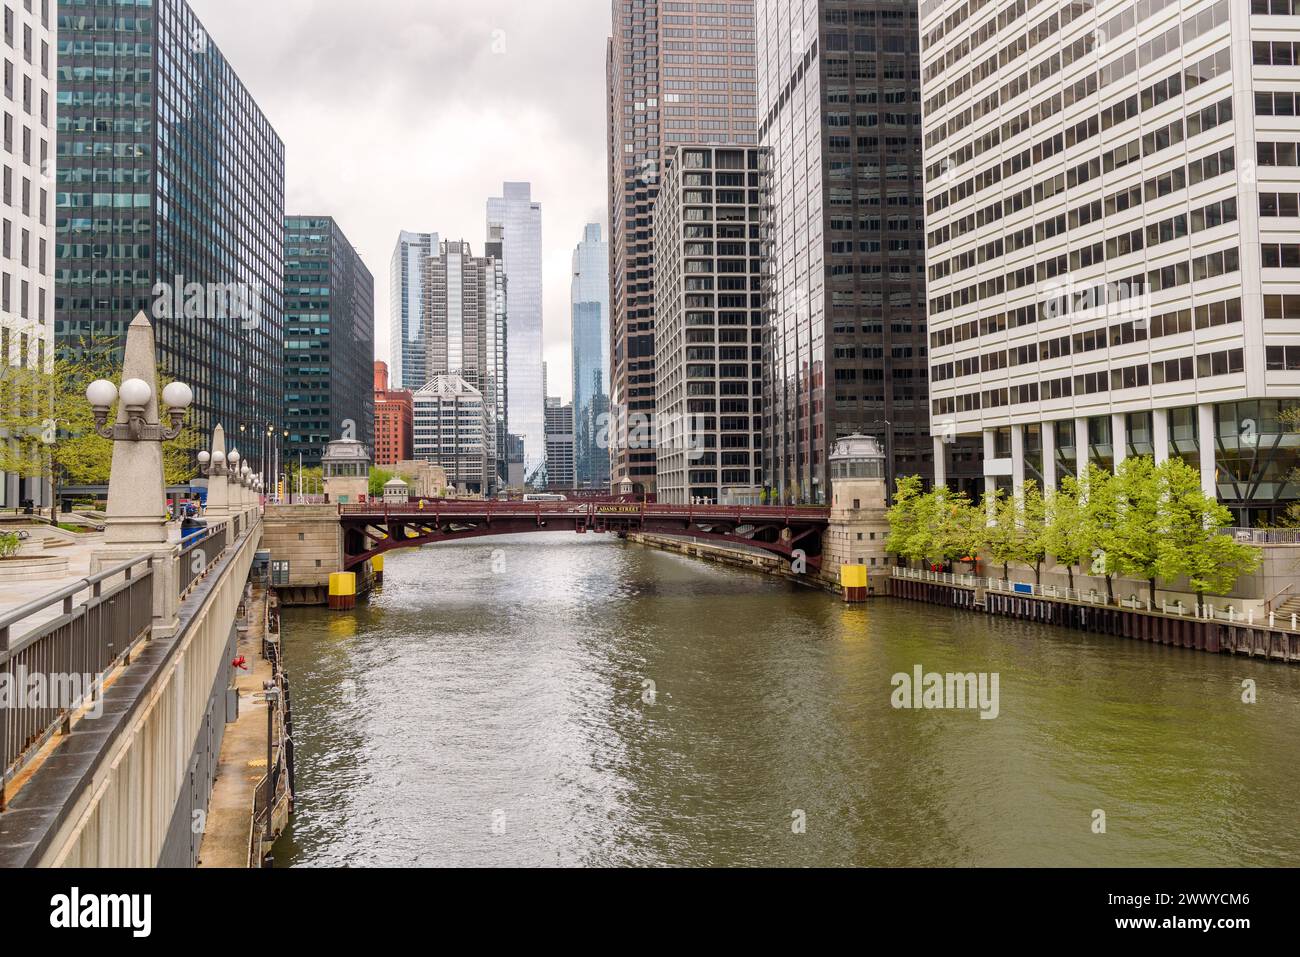 Modern office skyscrapres along Chicago river on a cloudy spring day Stock Photo